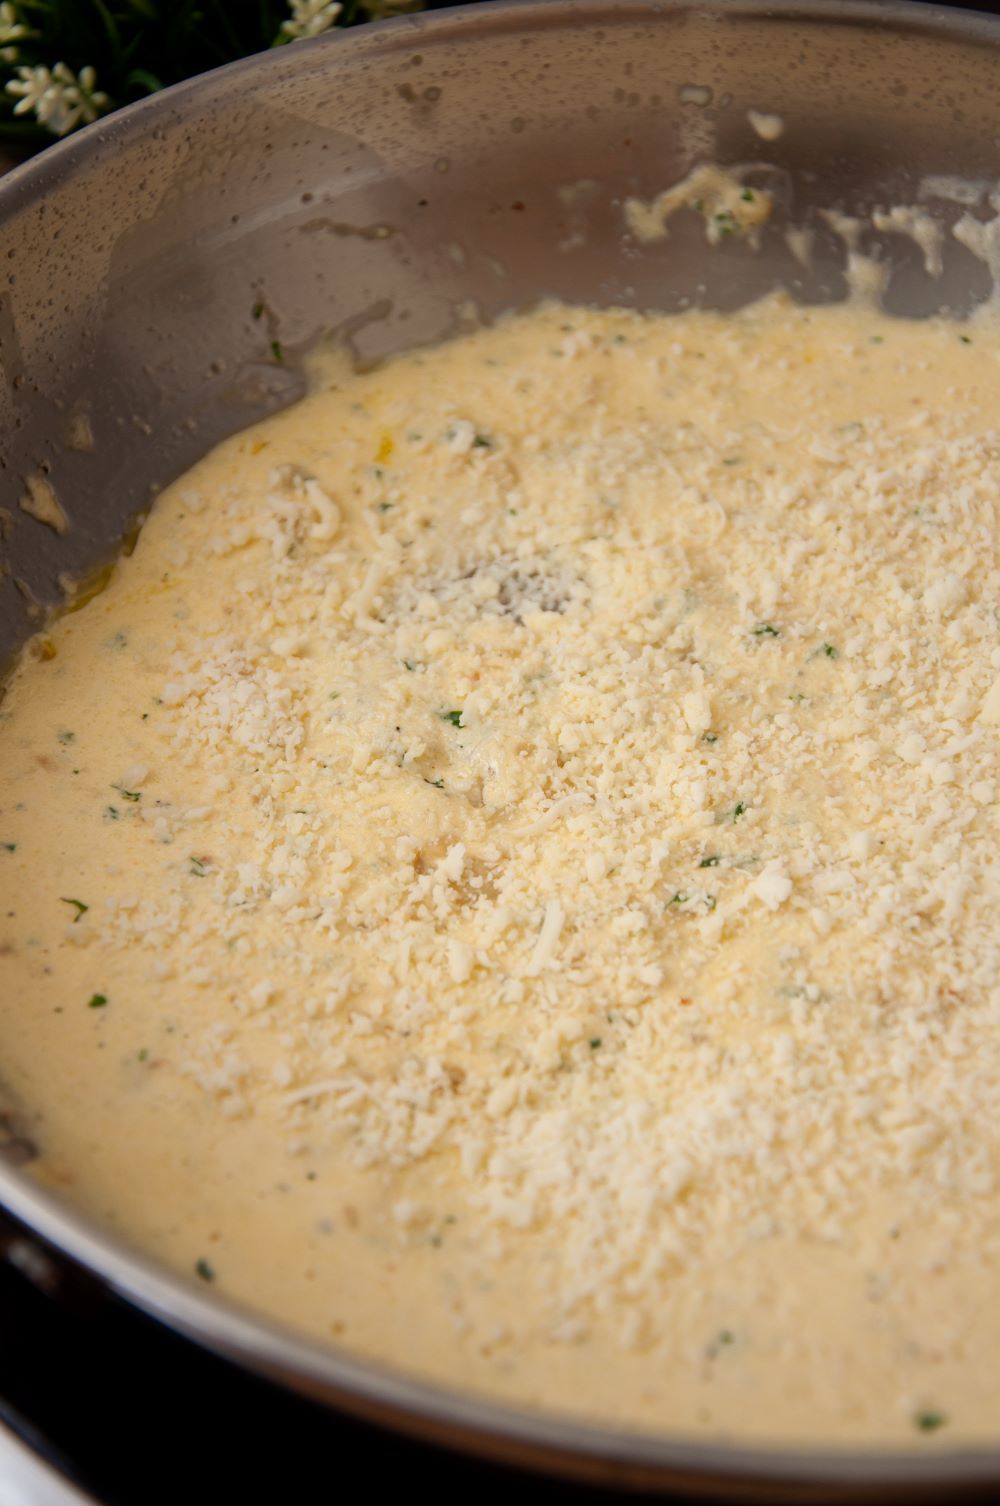 Thick heavy cream and grated parmesan cheese